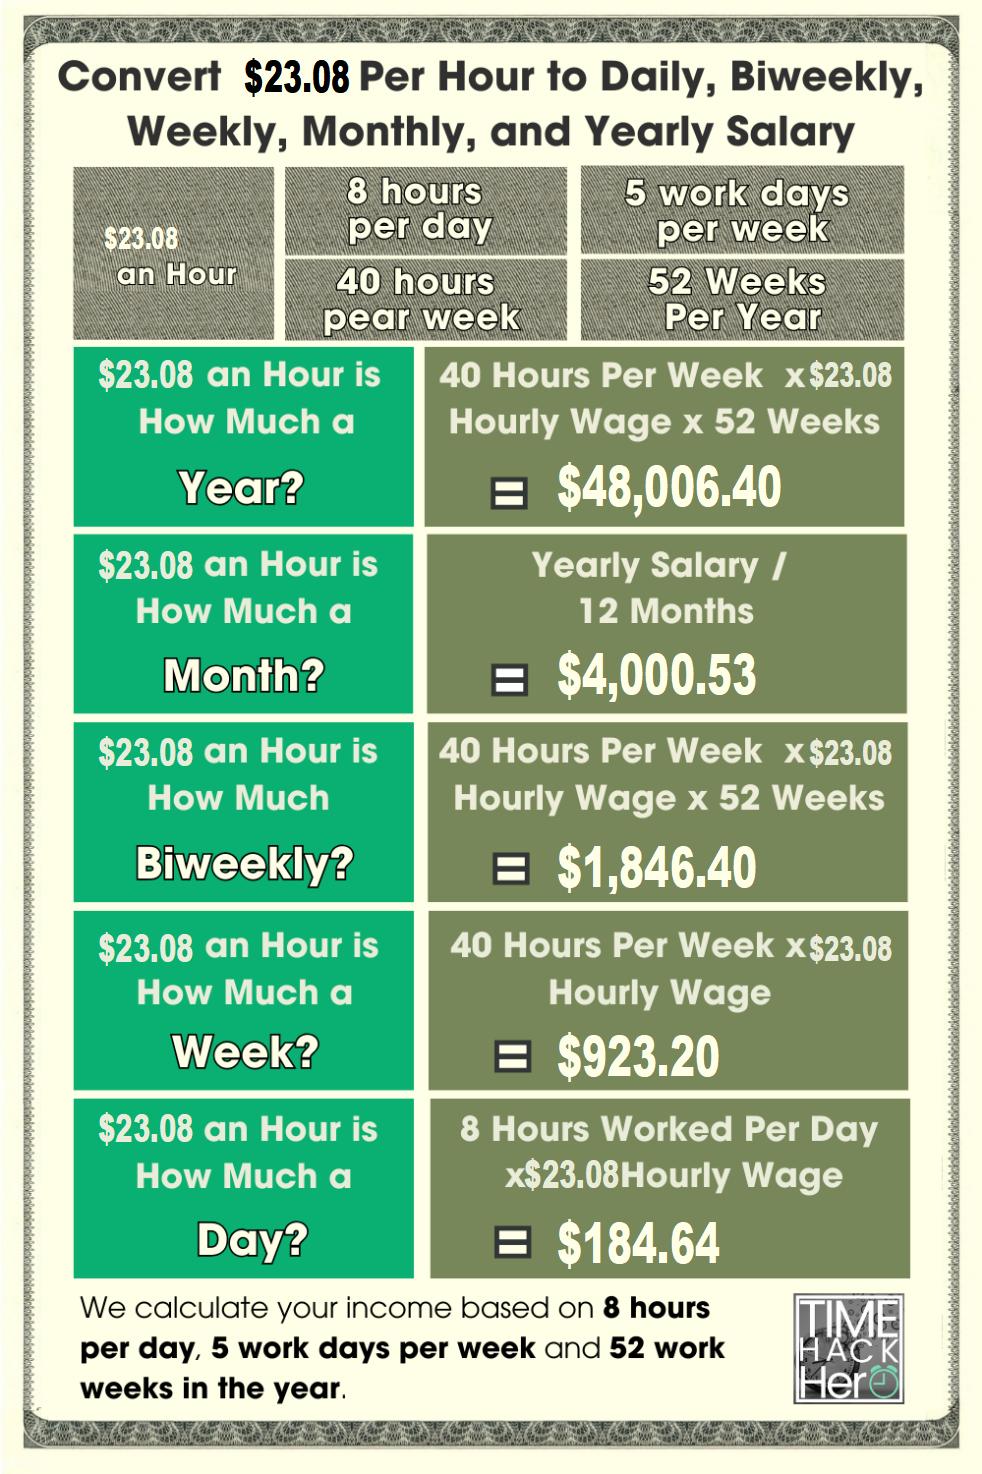 Convert $23.08 Per Hour to Weekly, Monthly, and Yearly Salary